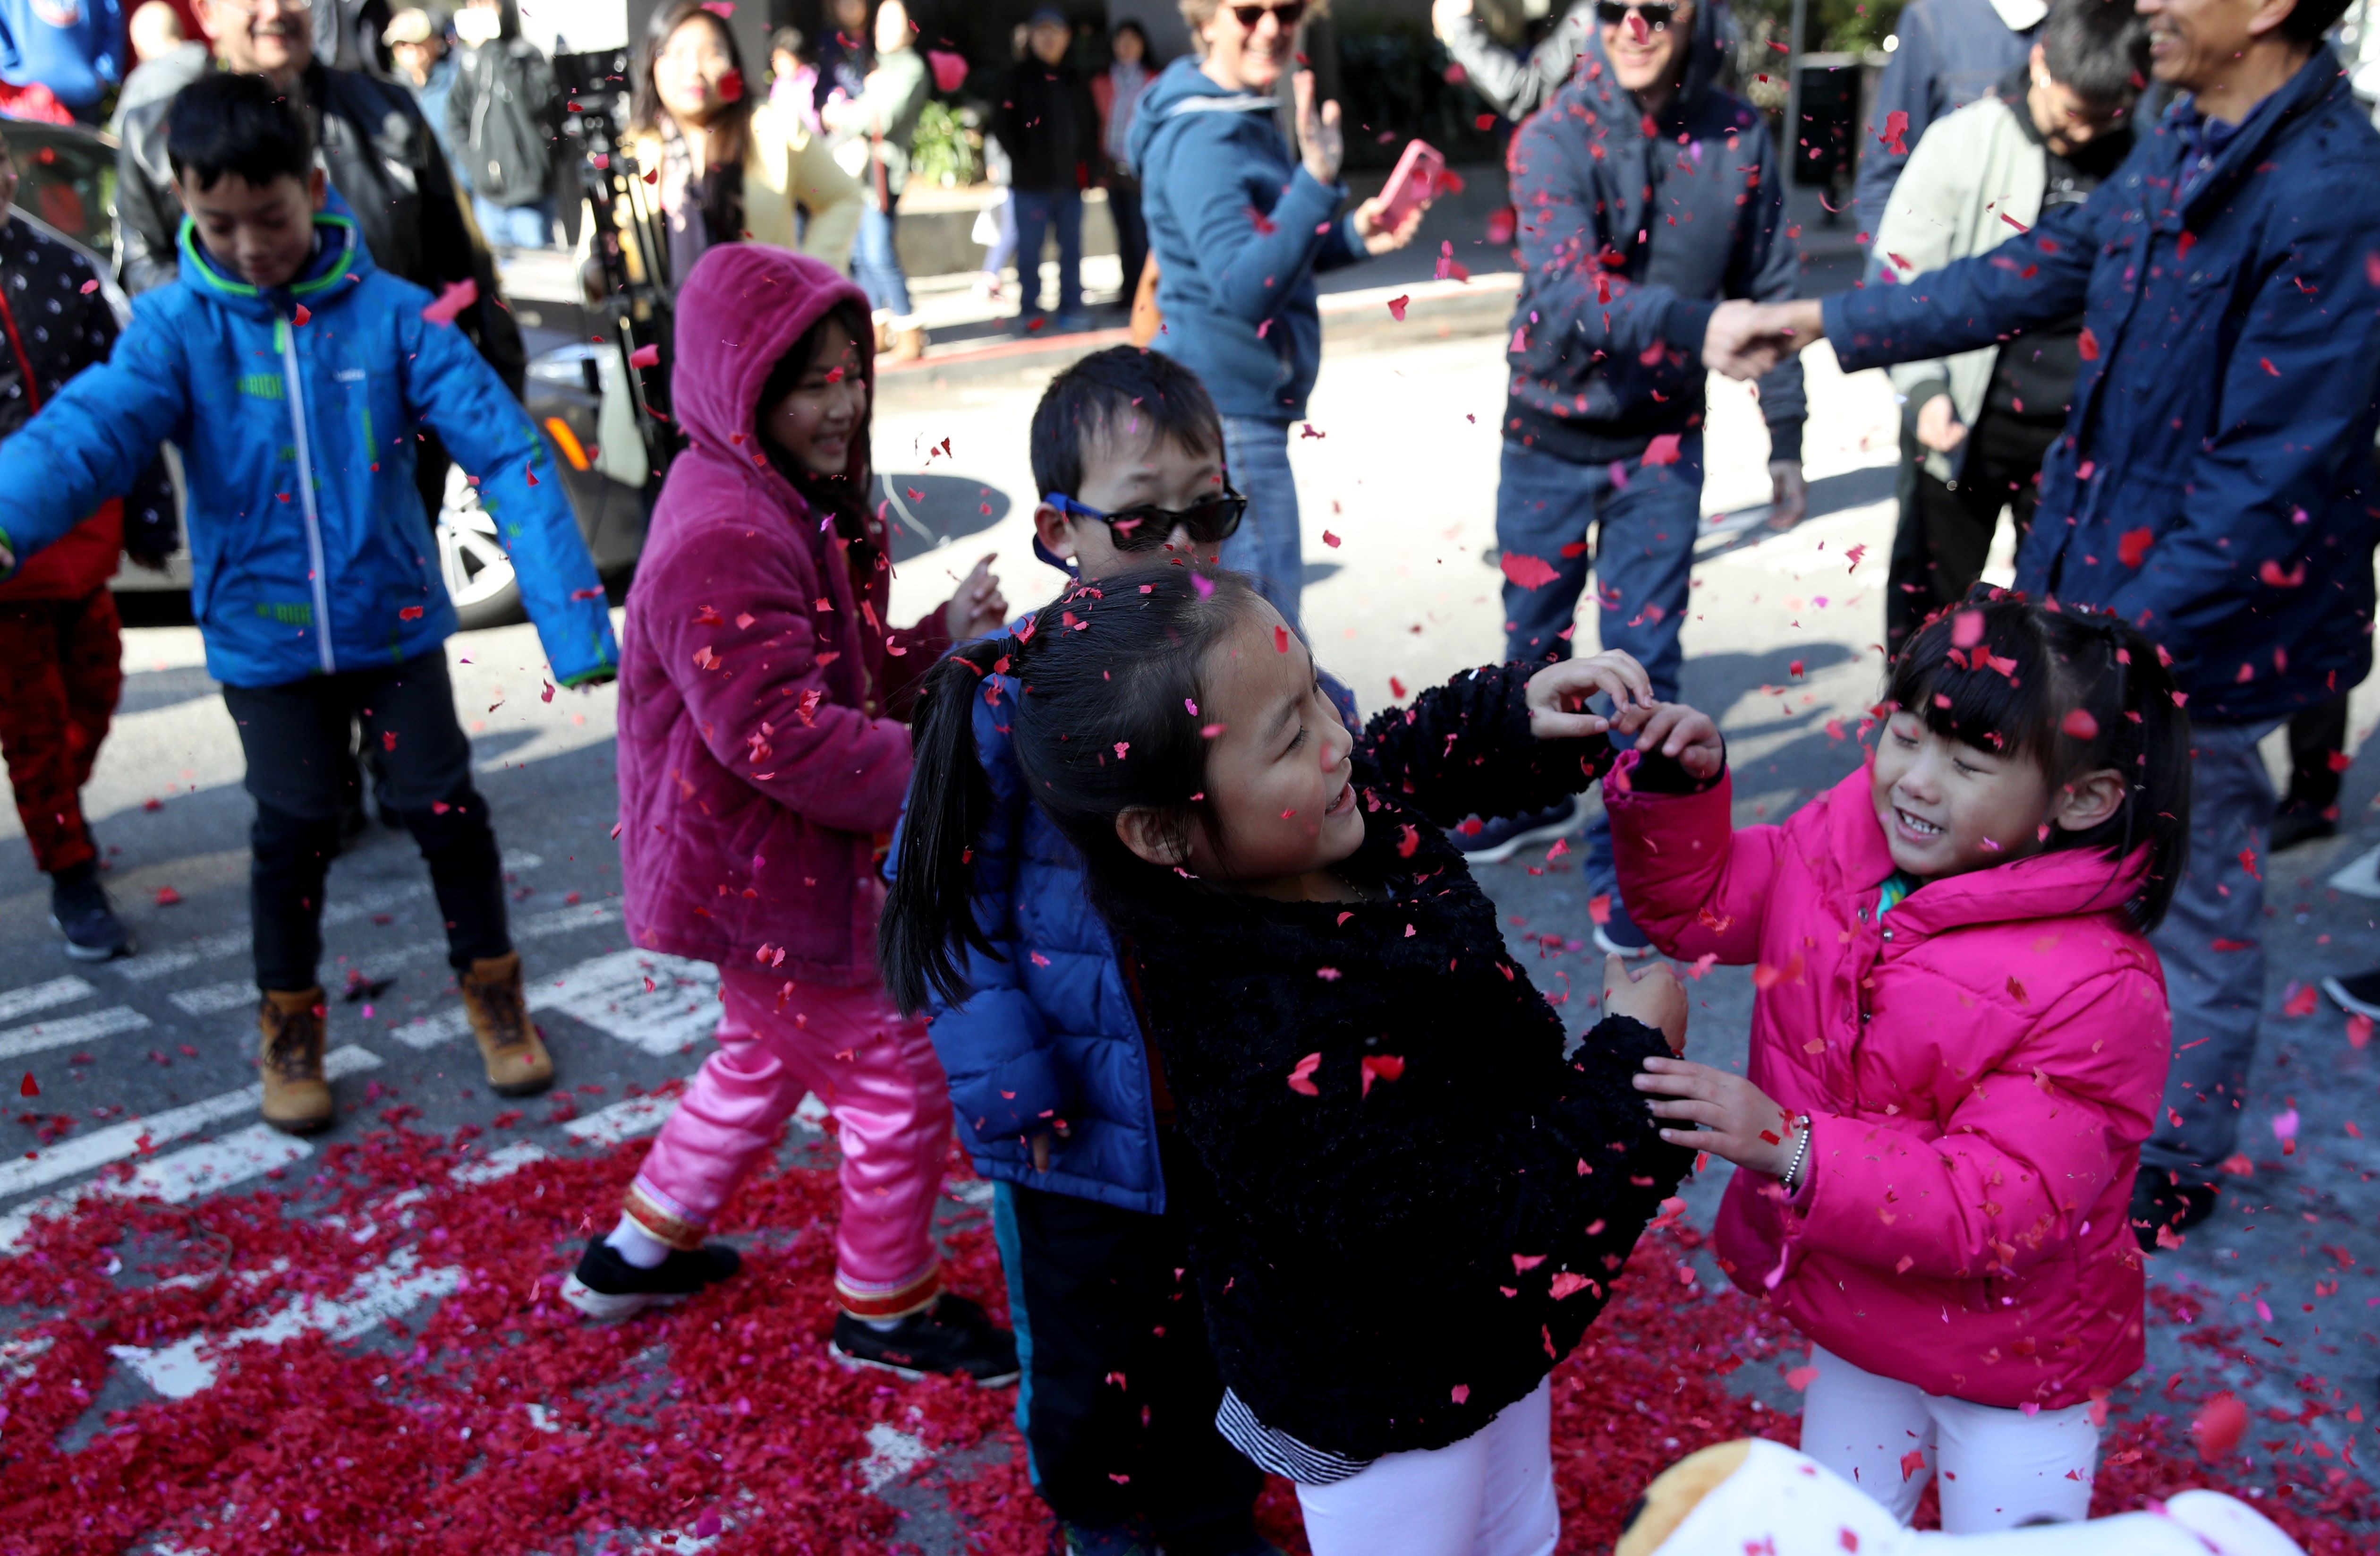 Children play with exploded firecracker wrappers while ushering in Lunar New Year, on Tuesday, in San Francisco, California. San Francisco will have a month-long celebration as part of the Year of the Pig. Photo: Getty Images/AFP